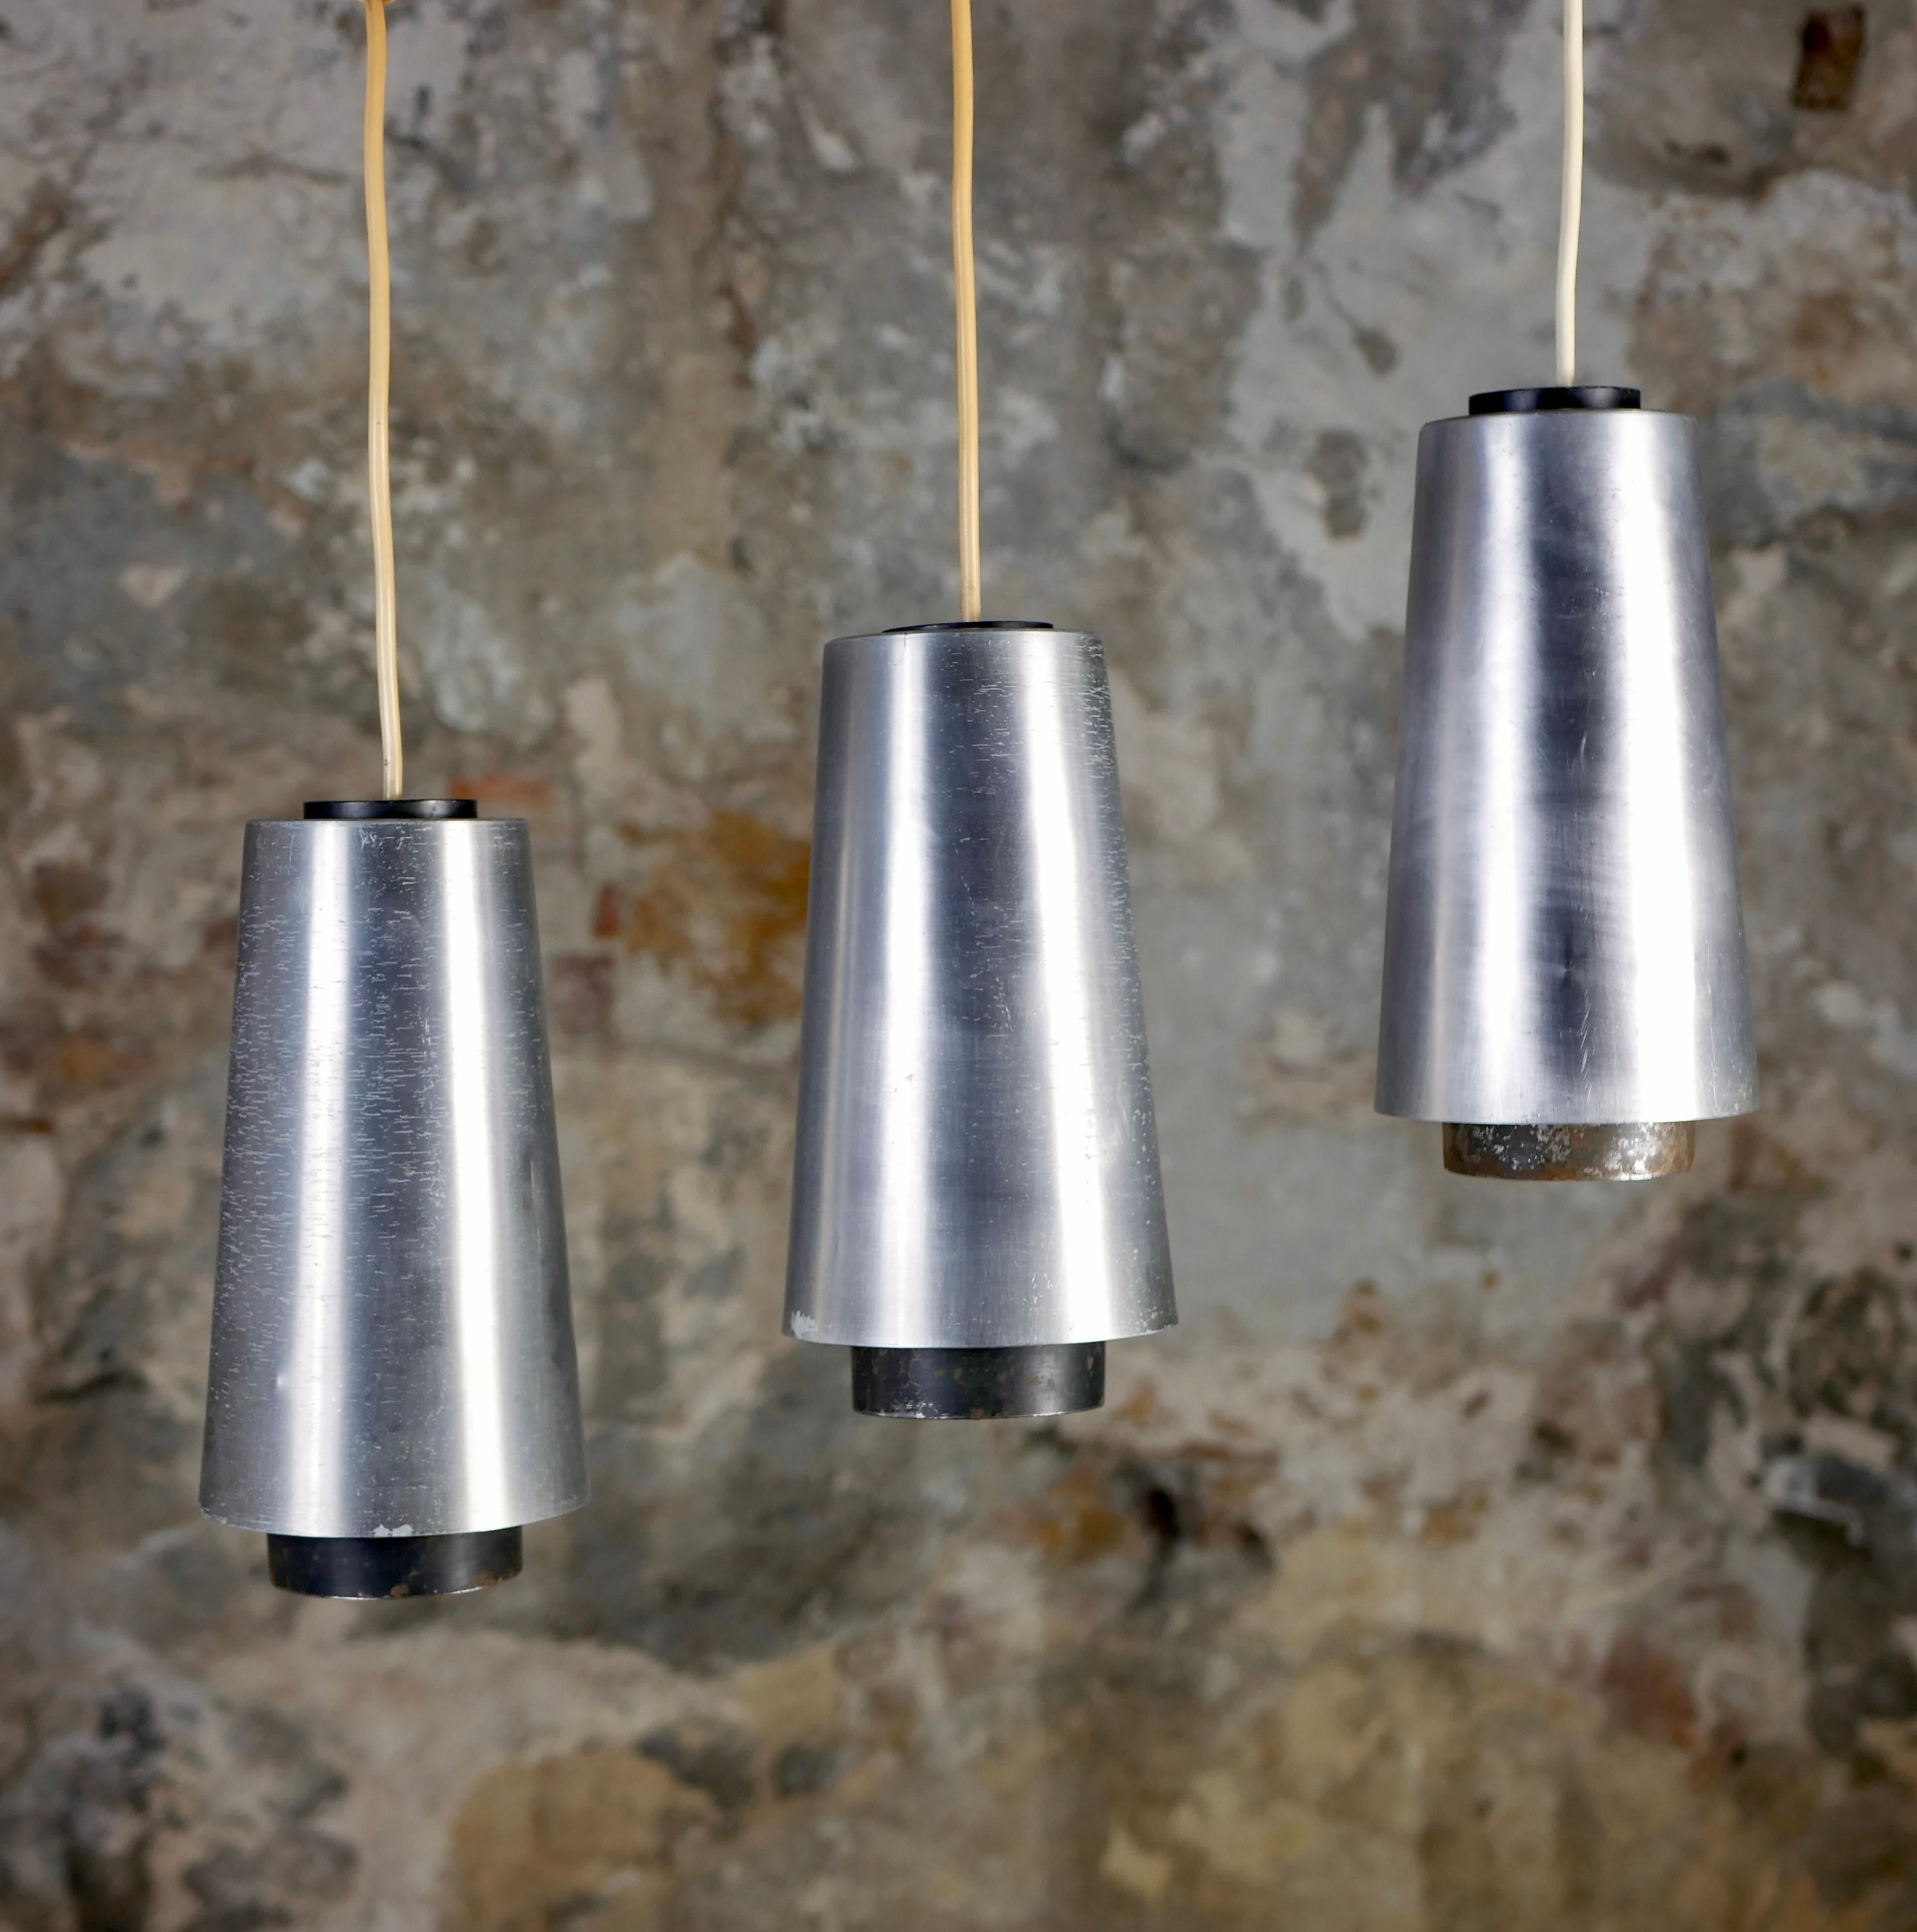 Set of 3 conical pendants in steel, made by Raak, Netherlands, in the 1960s.
Can be set as a unique 3 lights pendant or as 3 individual ones.
Traces of time (oxidation and chips)?
Dimensions : H29cm (with wire 70cm, D15cm